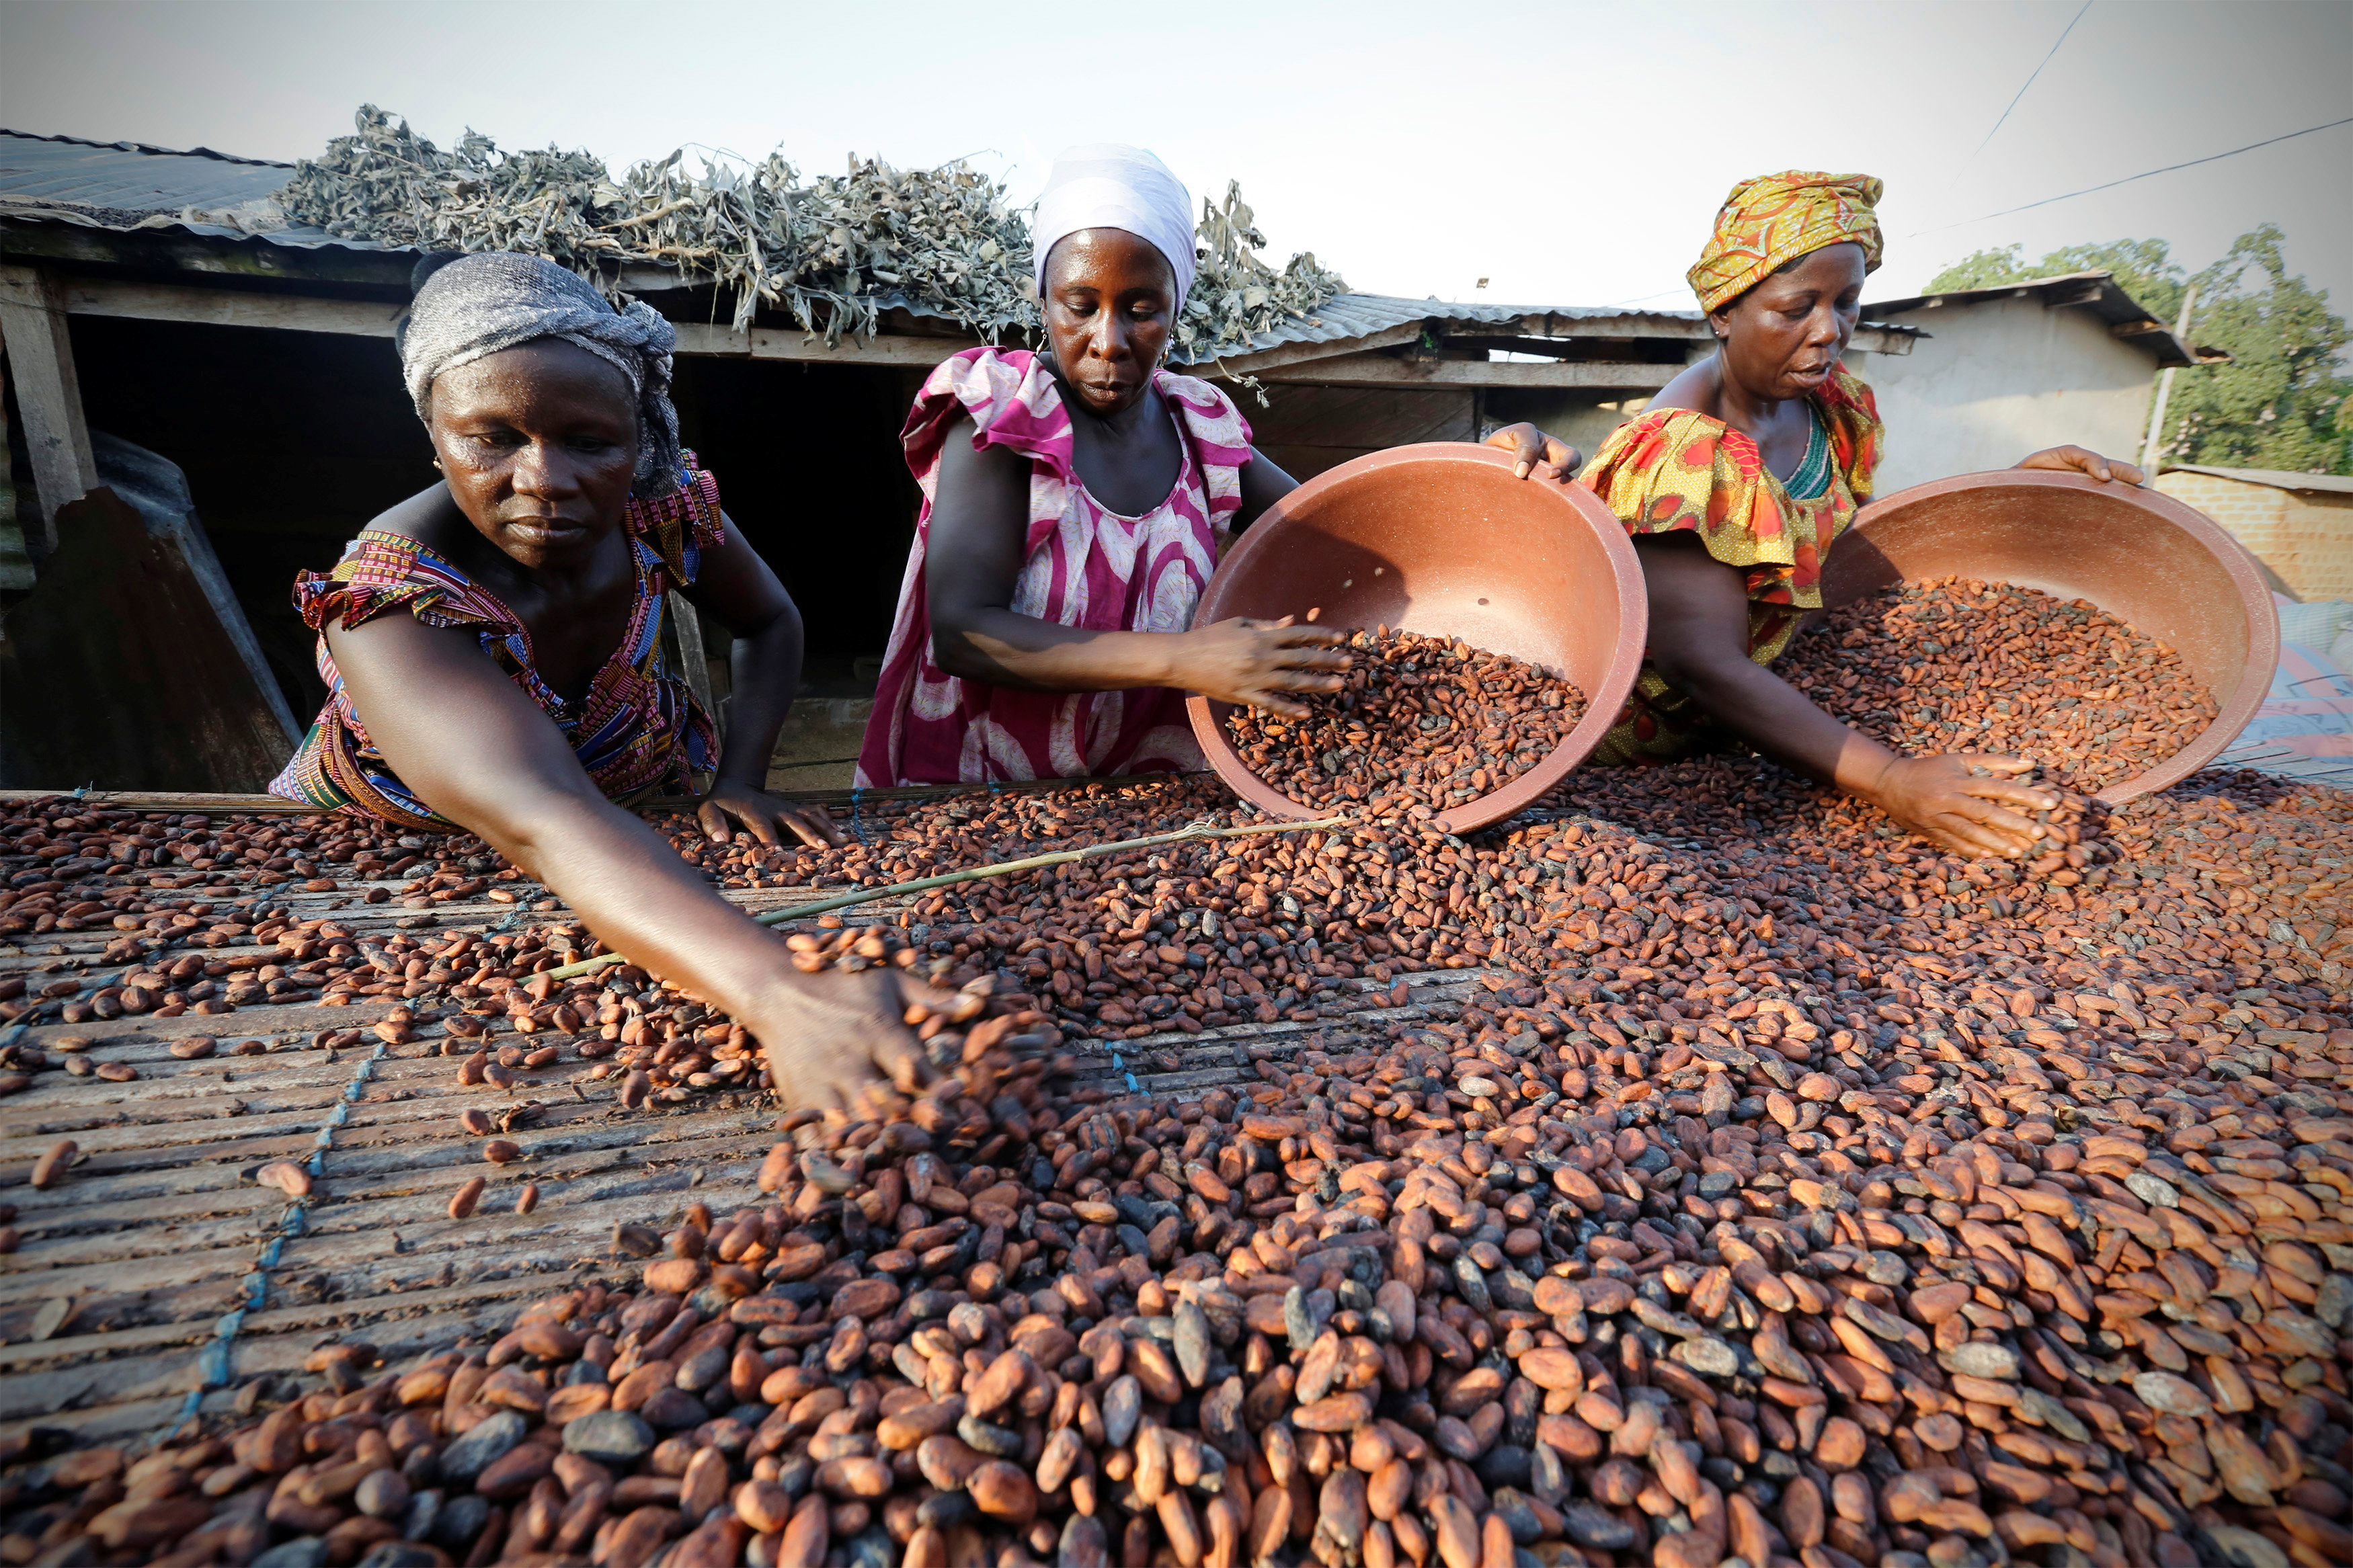 Africa in the news: Côte d'Ivoire and Ghana set cocoa prices, emerging  powers seek to expand influence in Africa, and health officials pledge to  end cholera